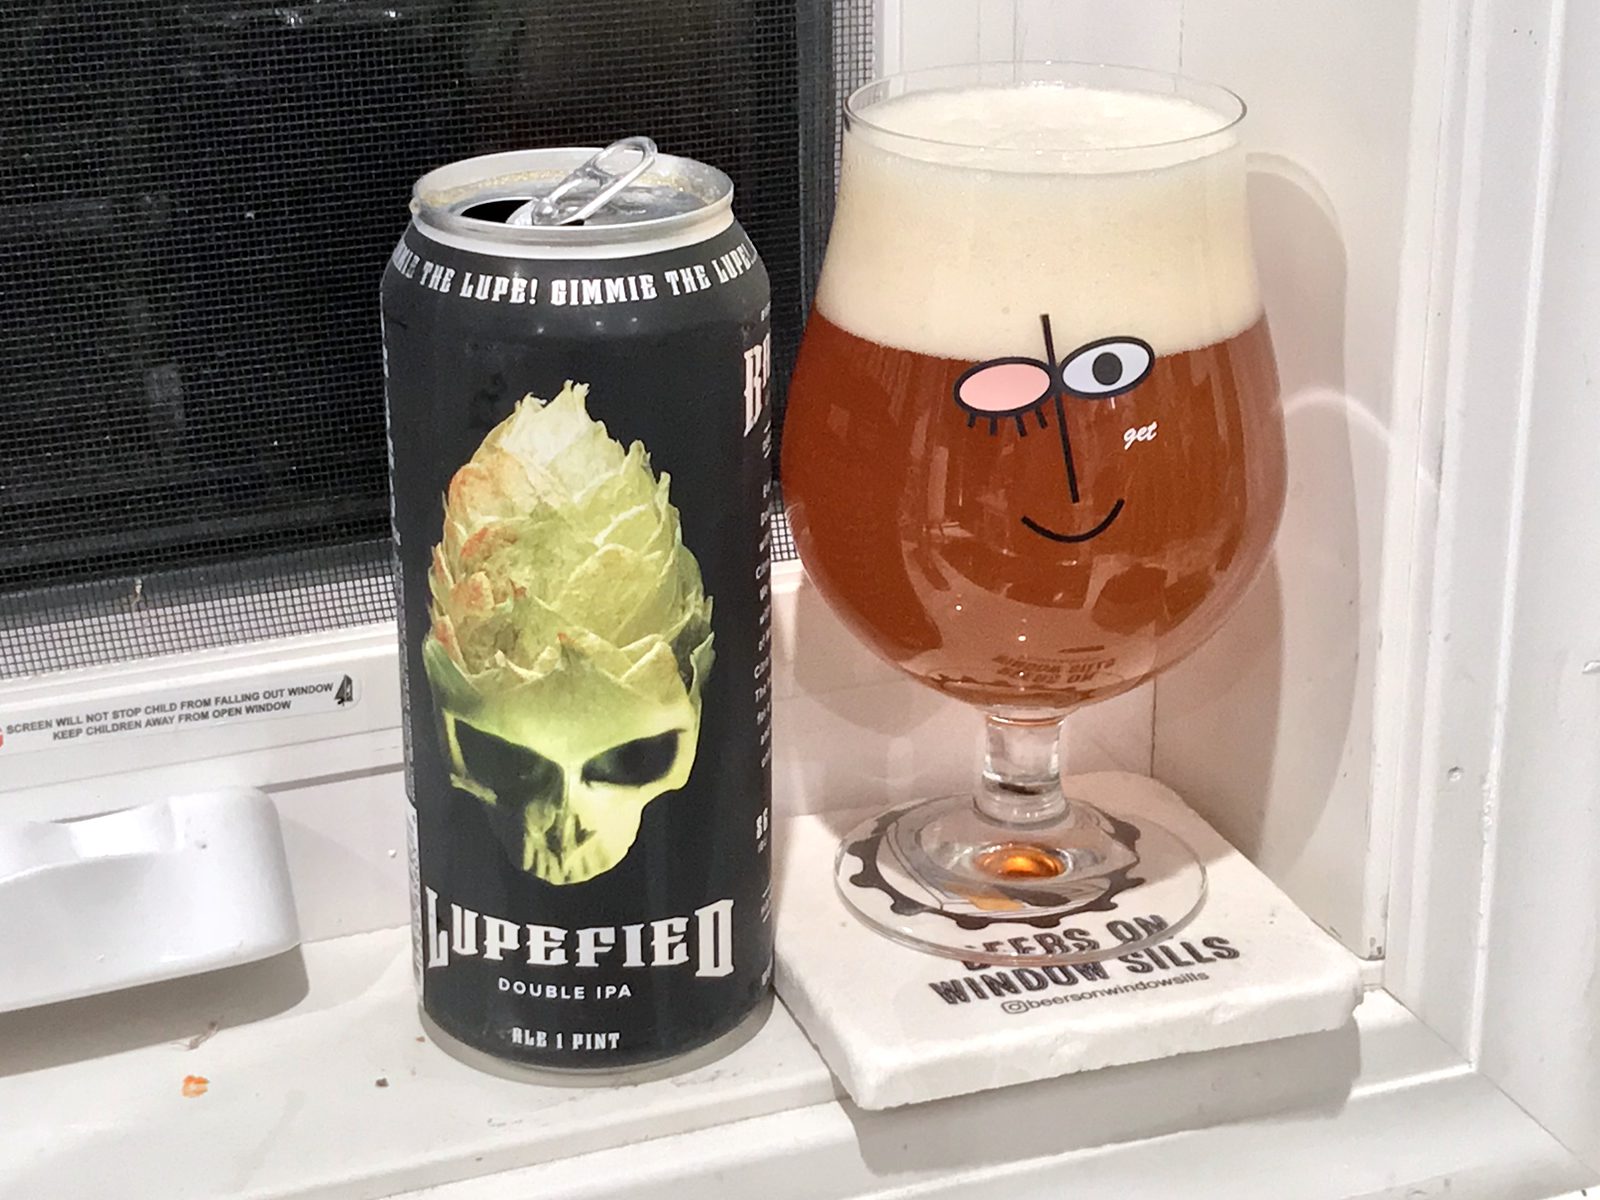 BAD SONS Beer Co.: Lupefied